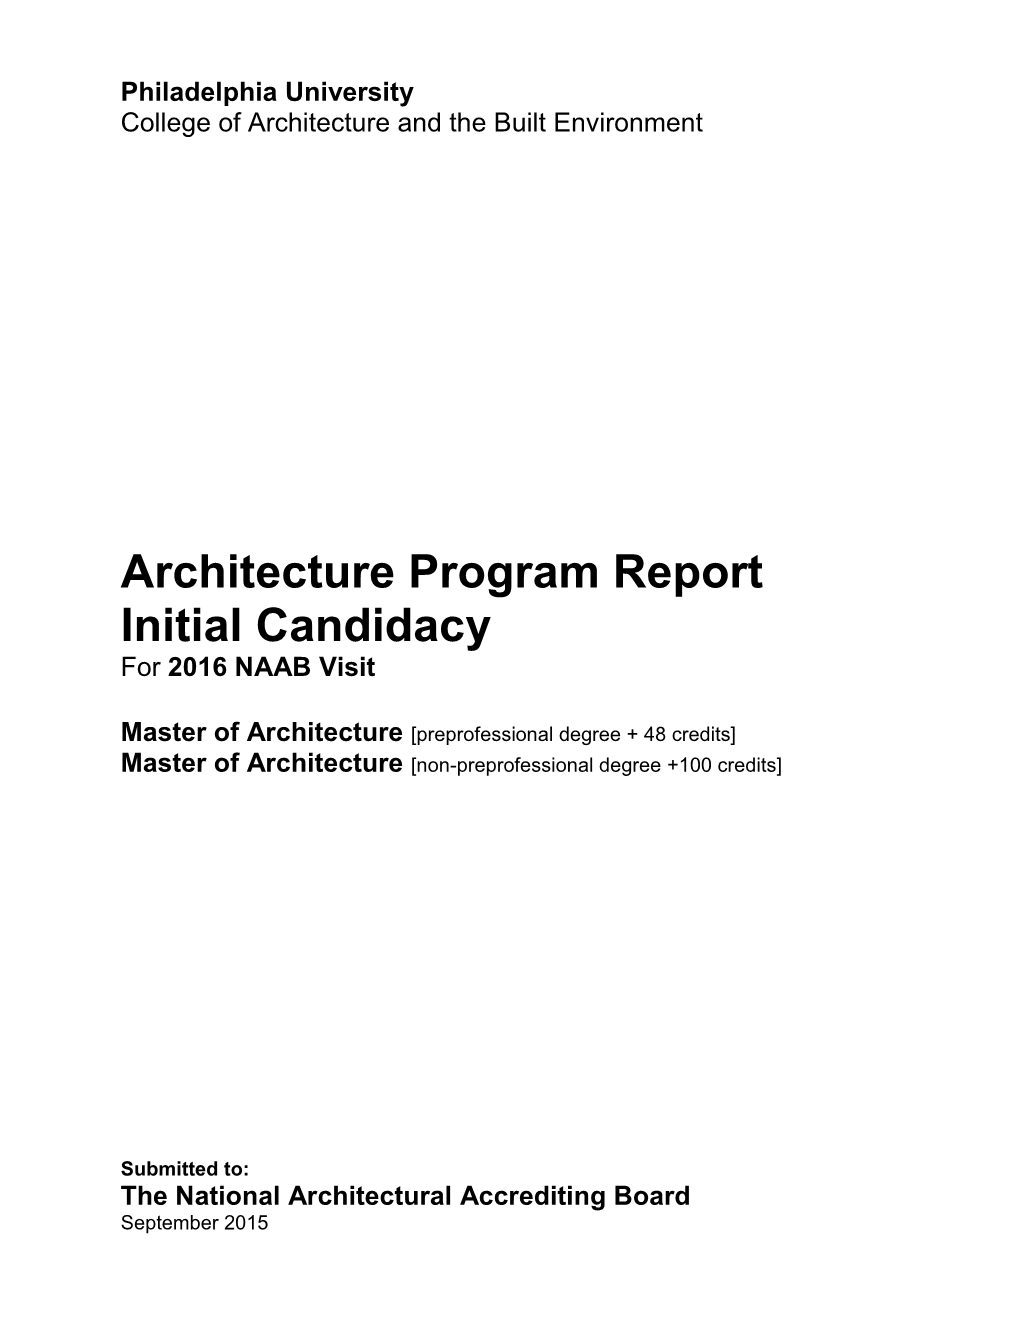 Architecture Program Report Initial Candidacy for 2016 NAAB Visit